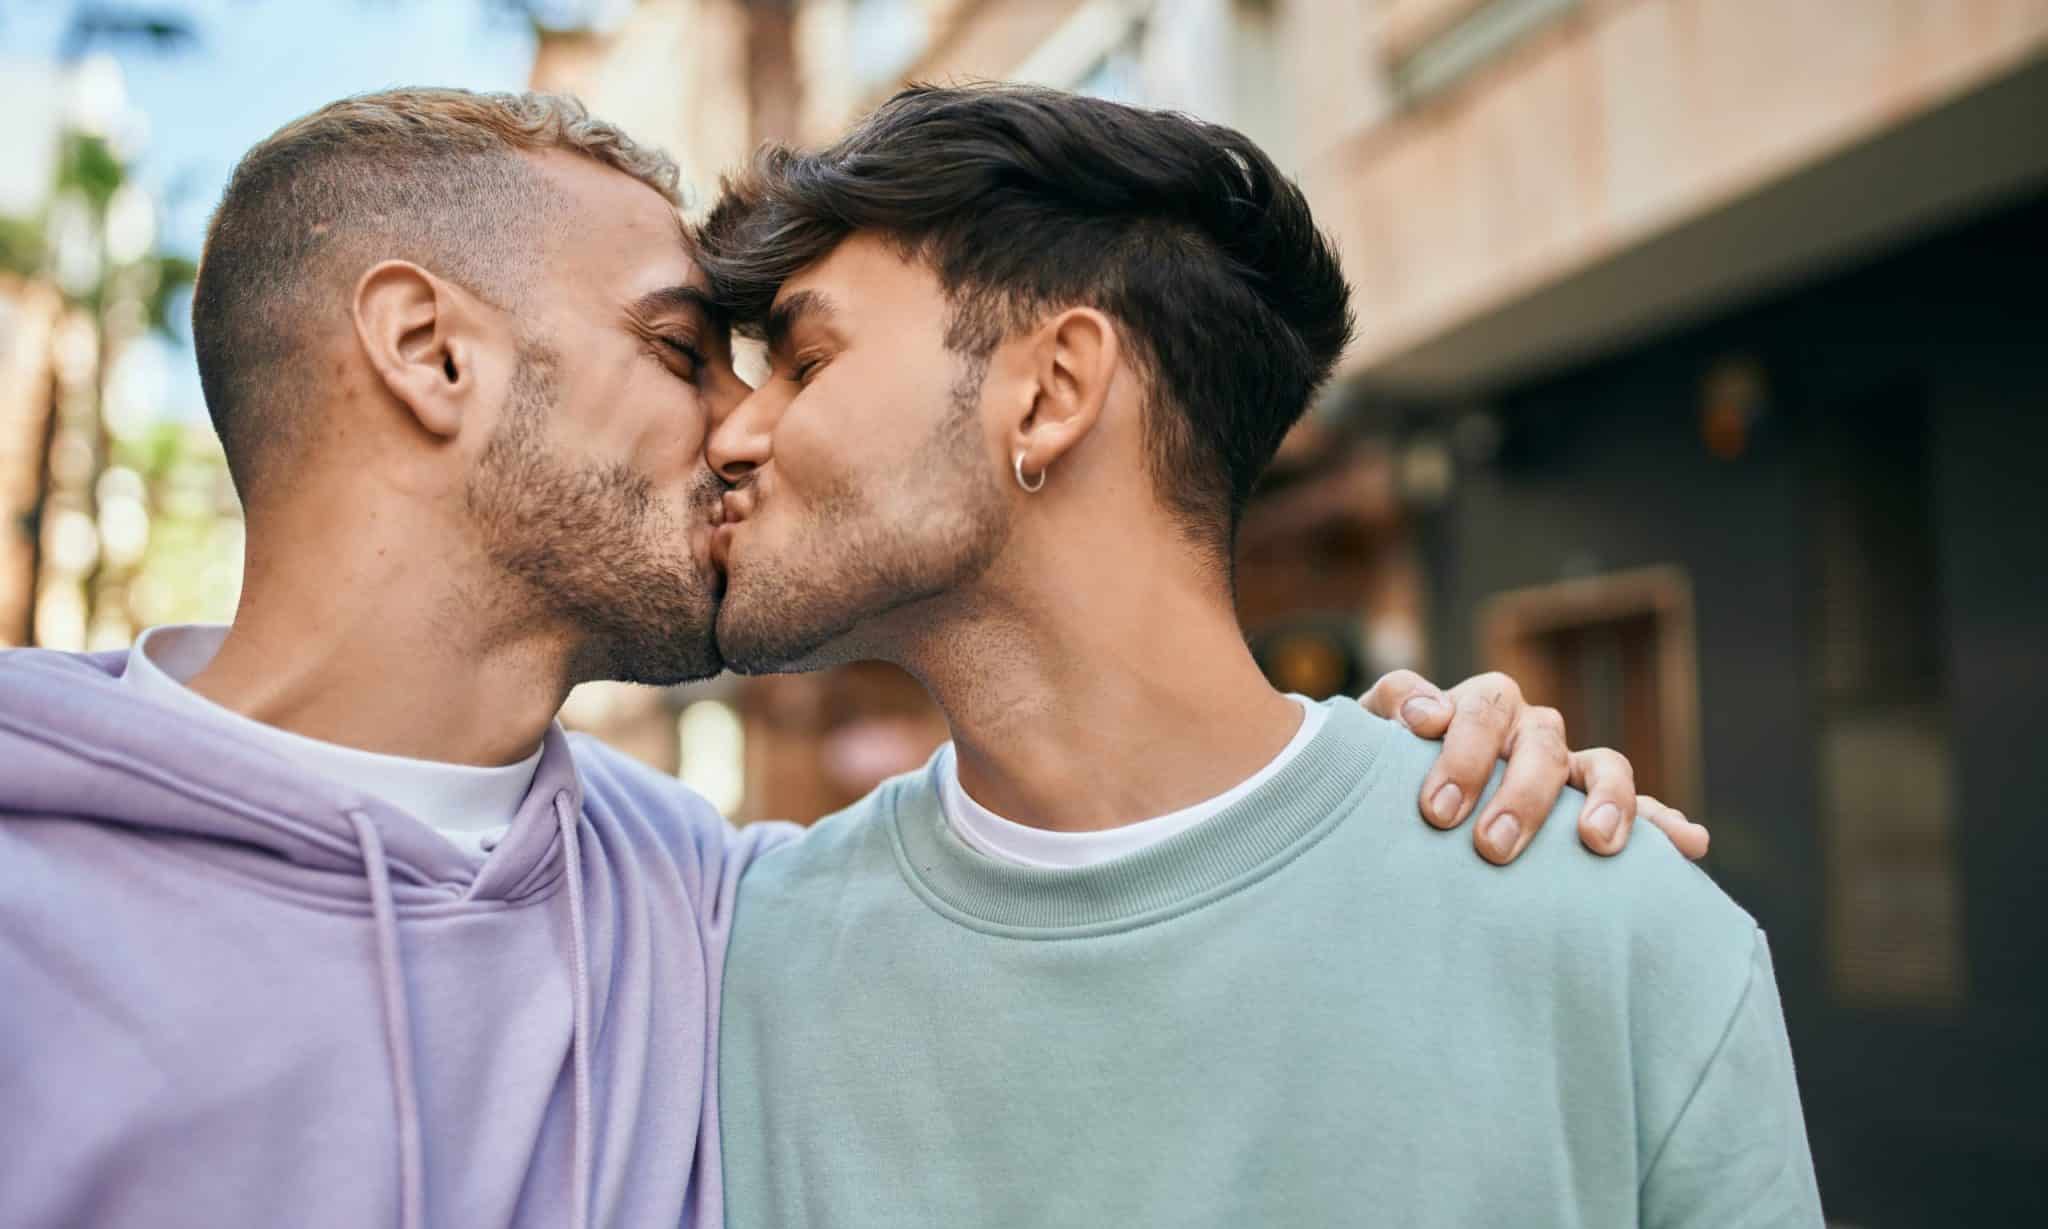 Young gay couple hugging and kissing at the city.